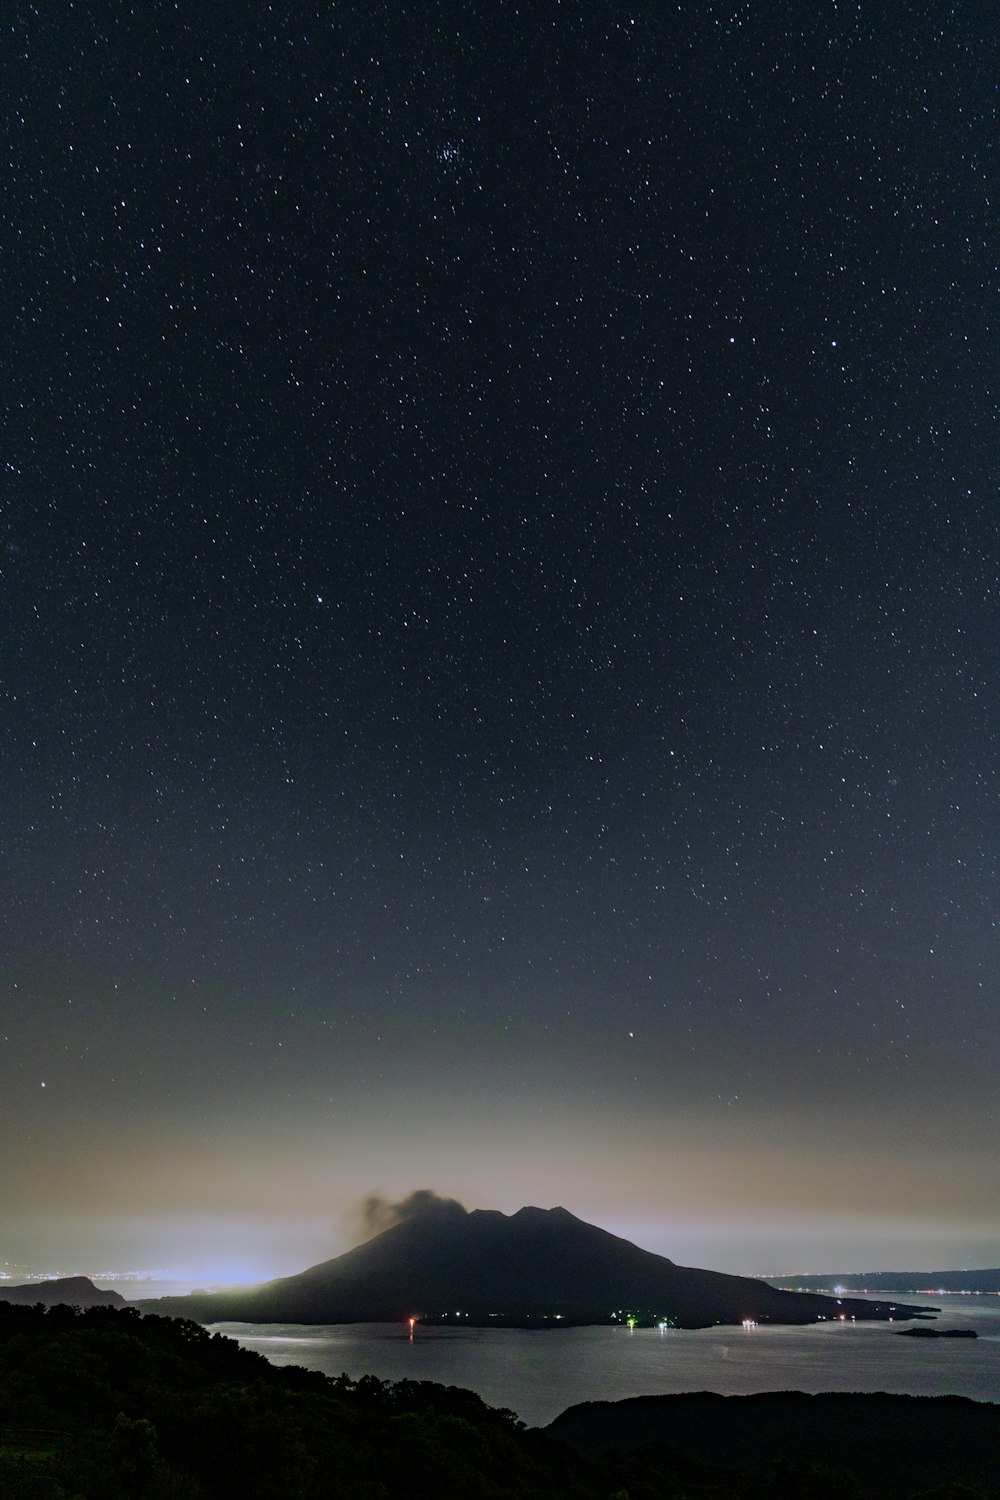 the night sky with stars and a mountain in the distance